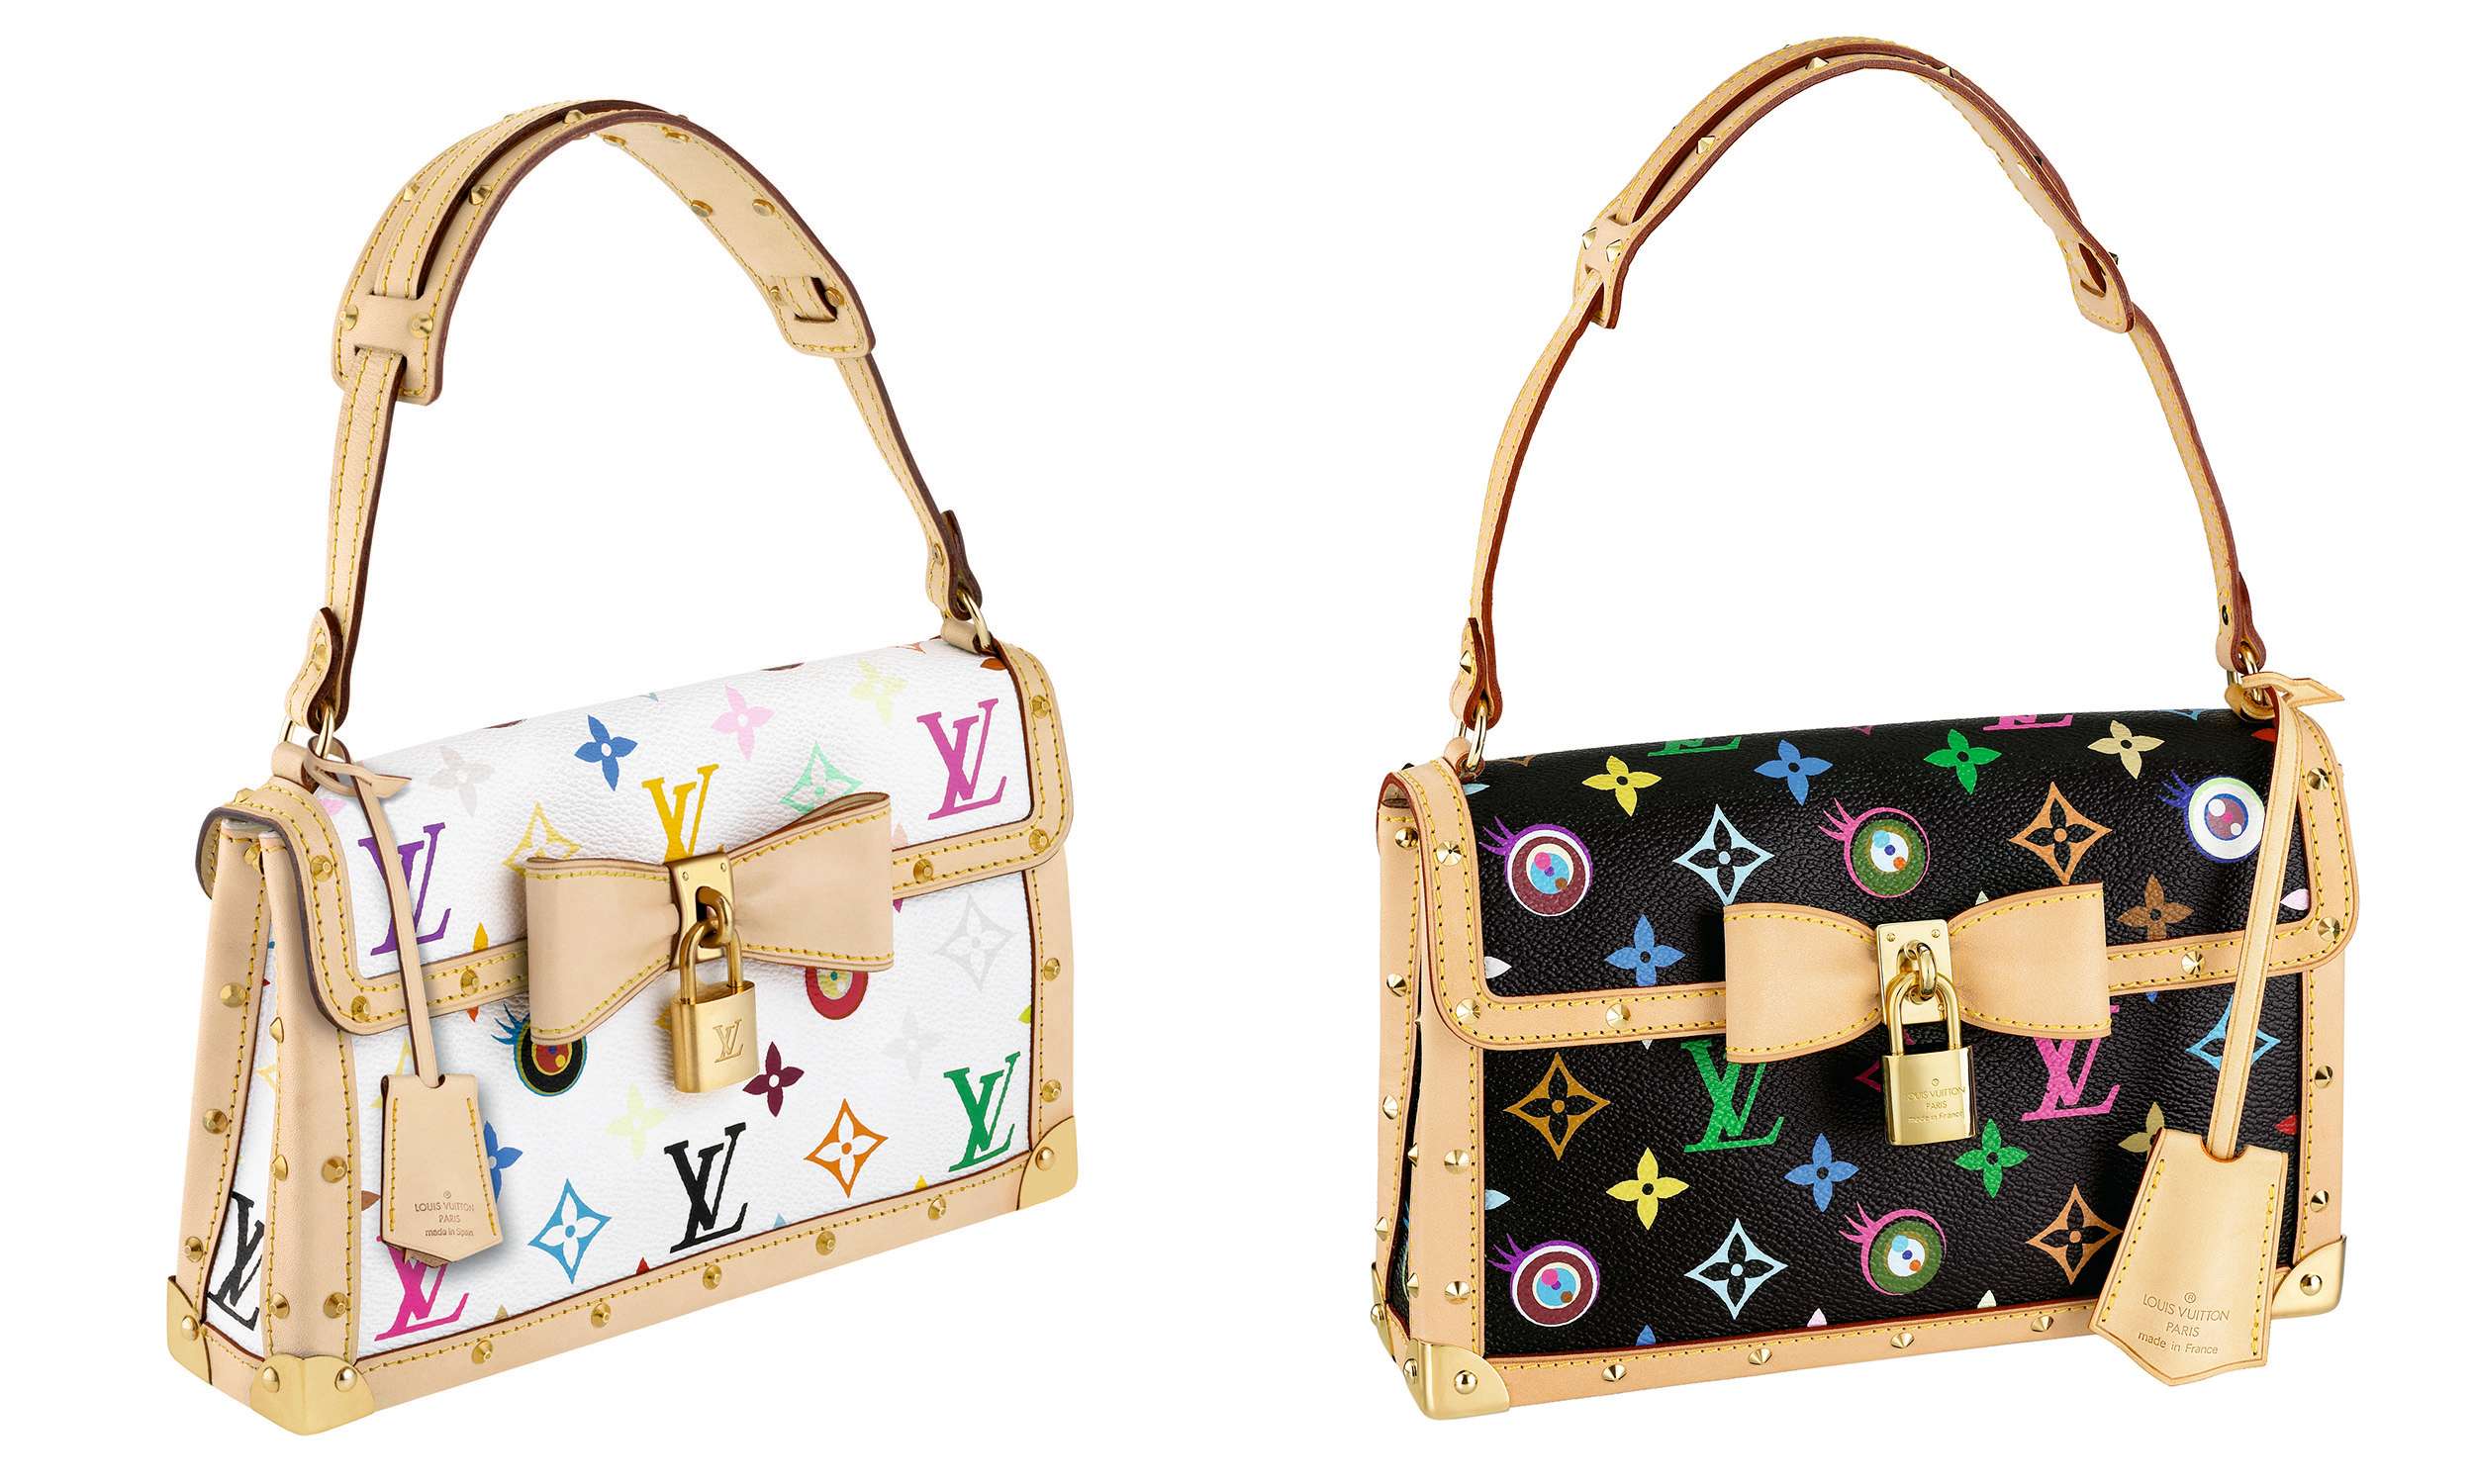 Bags from the 'Multicolor Monogram' collection - Takashi Murakami for Louis Vuitton. Courtesy of Louis Vuitton.